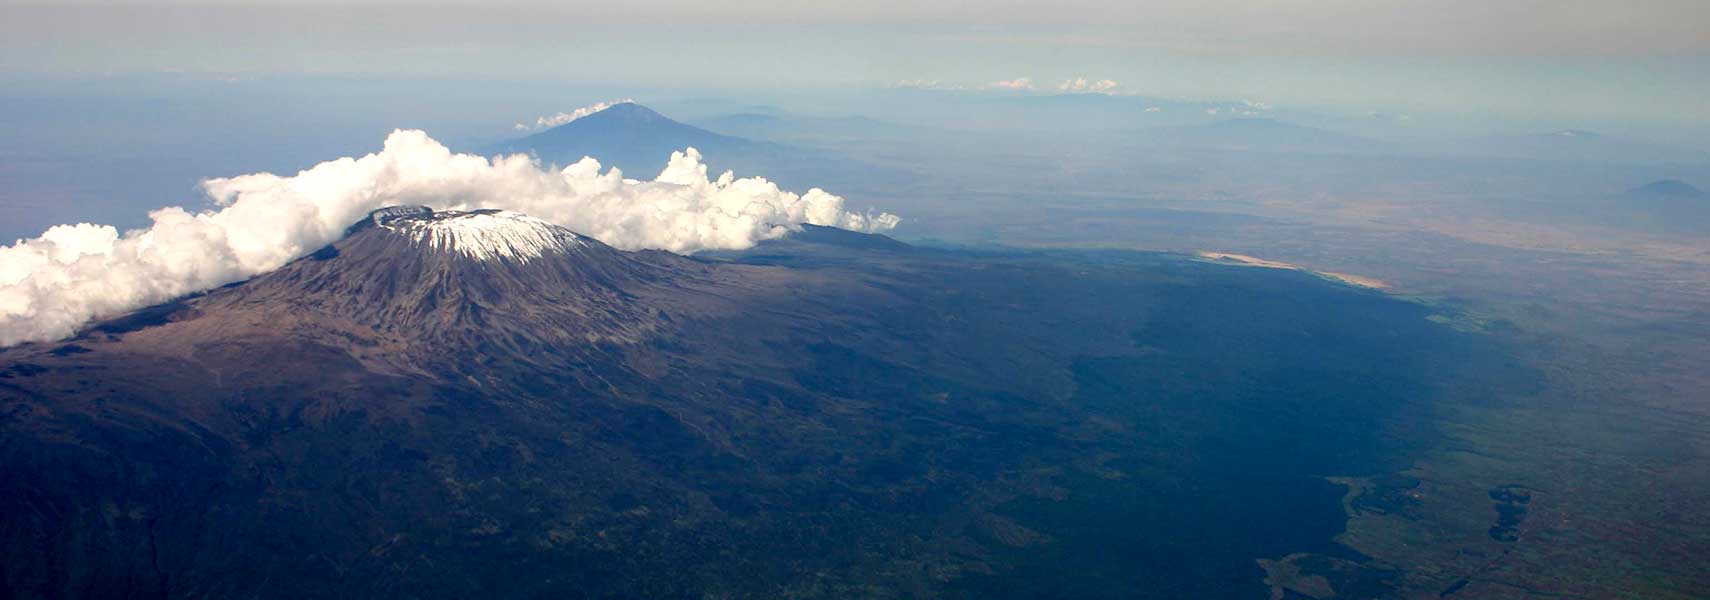 Mount Kilimanjaro seen from the air